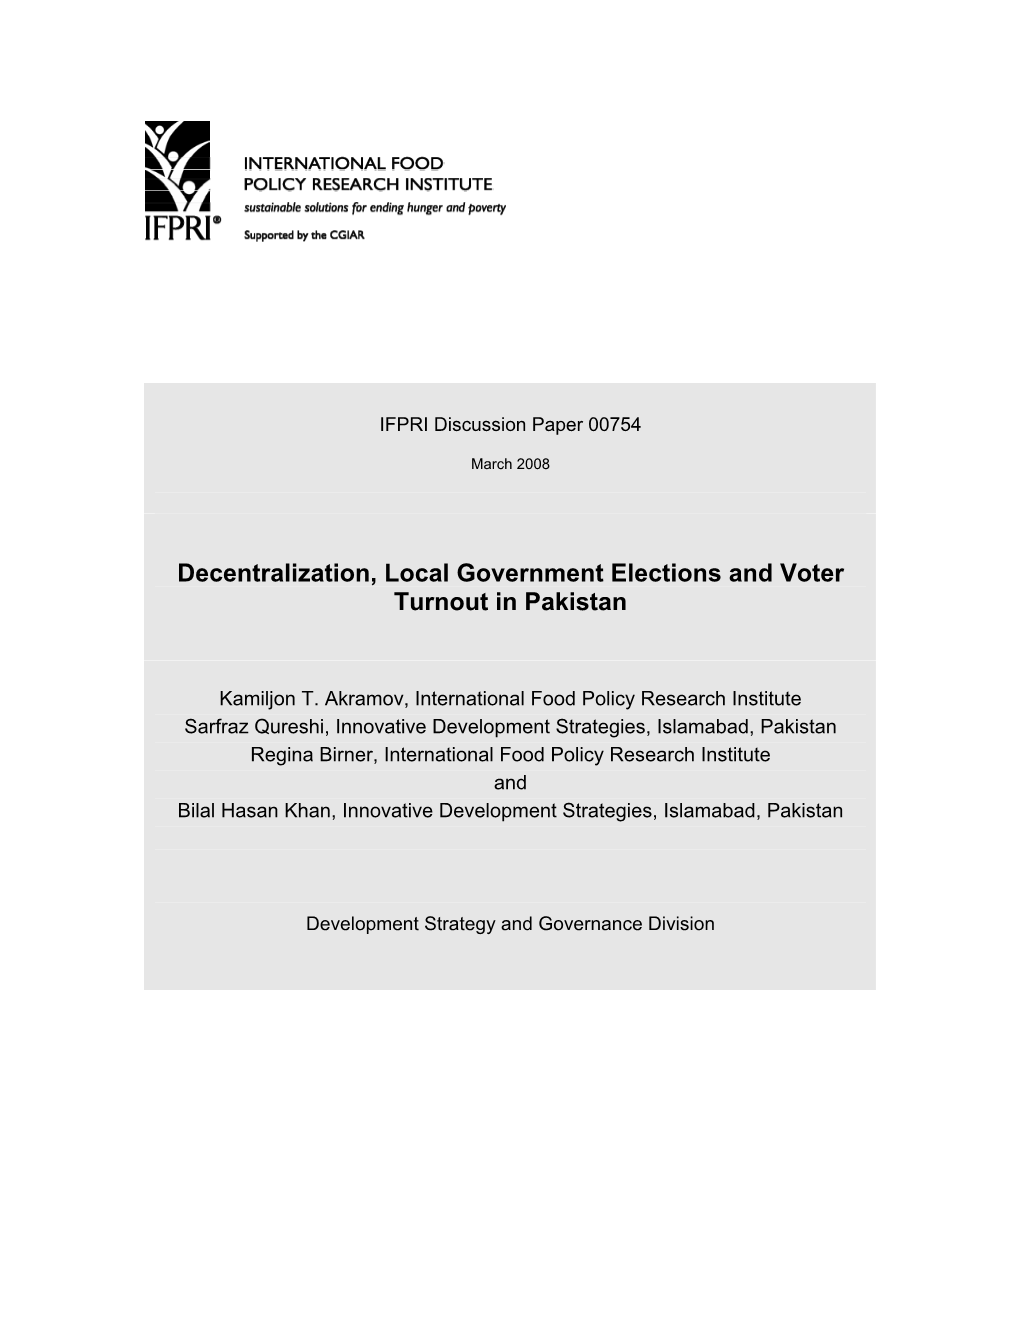 Decentralization, Local Government Elections and Voter Turnout in Pakistan